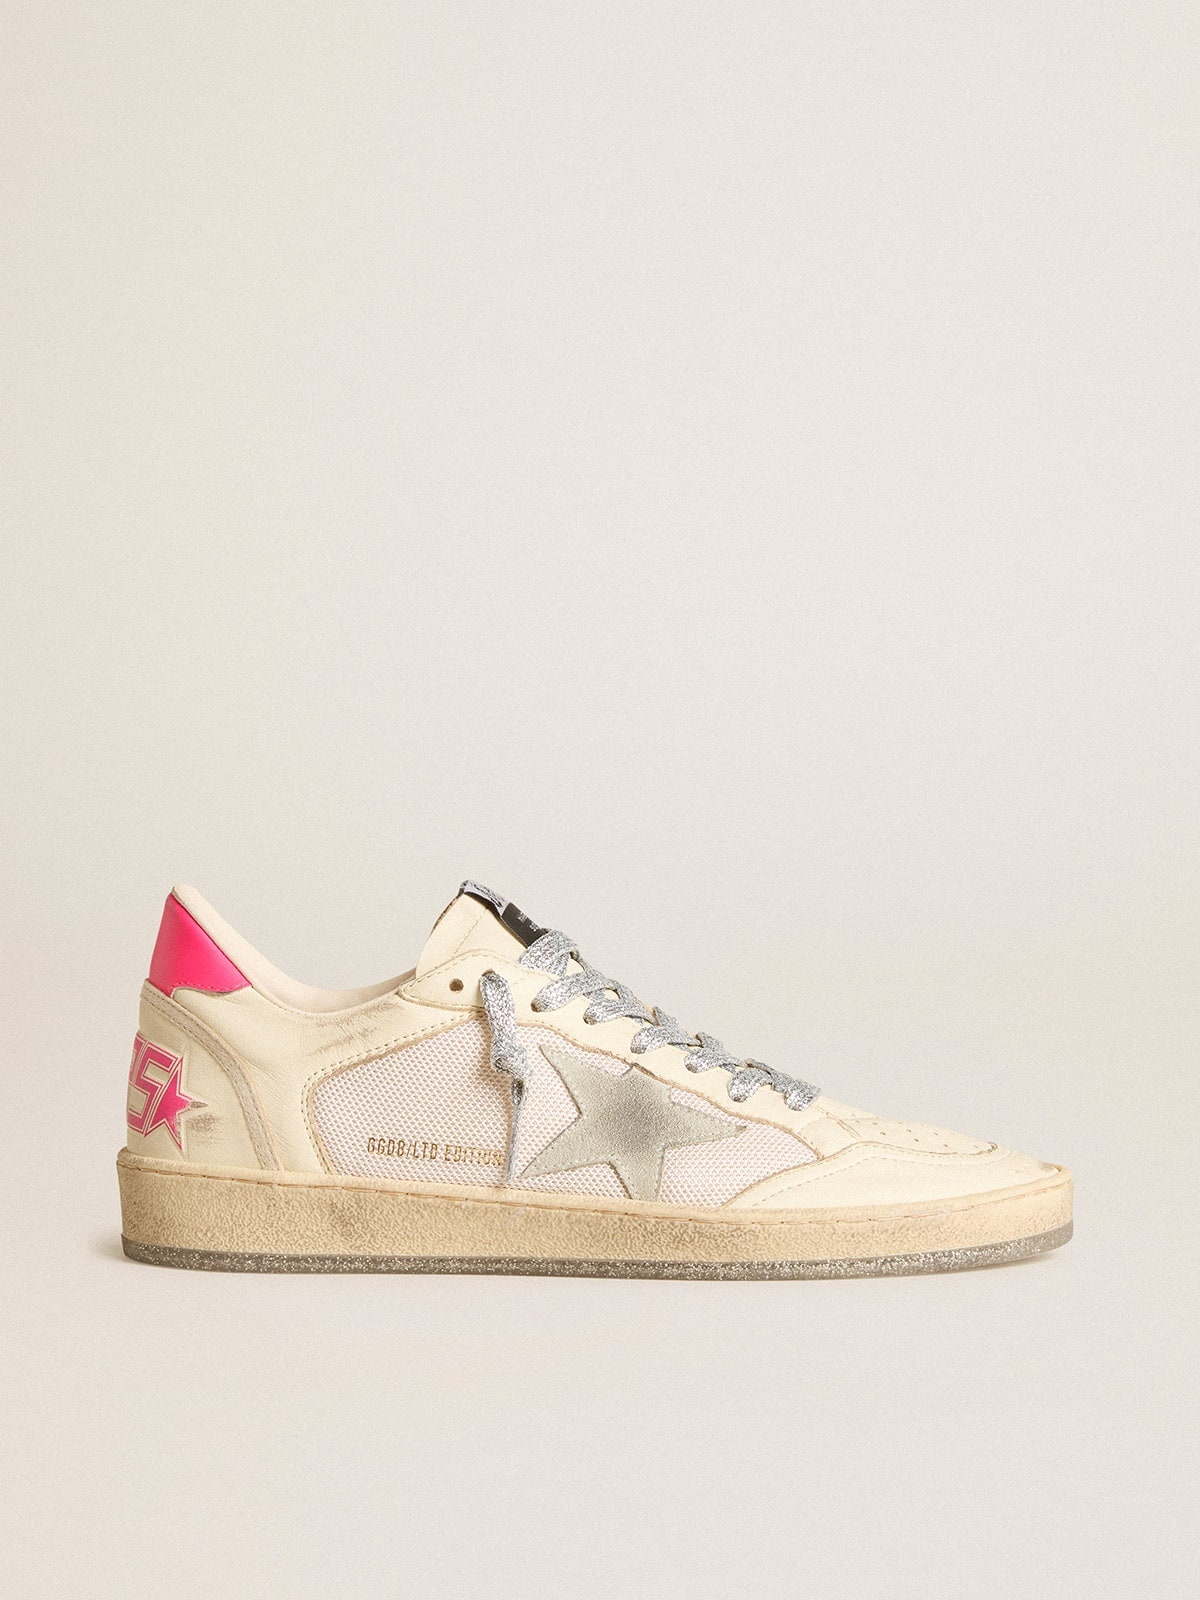 Ball Star LTD in nappa leather and mesh with suede star and leather heel tab - 1